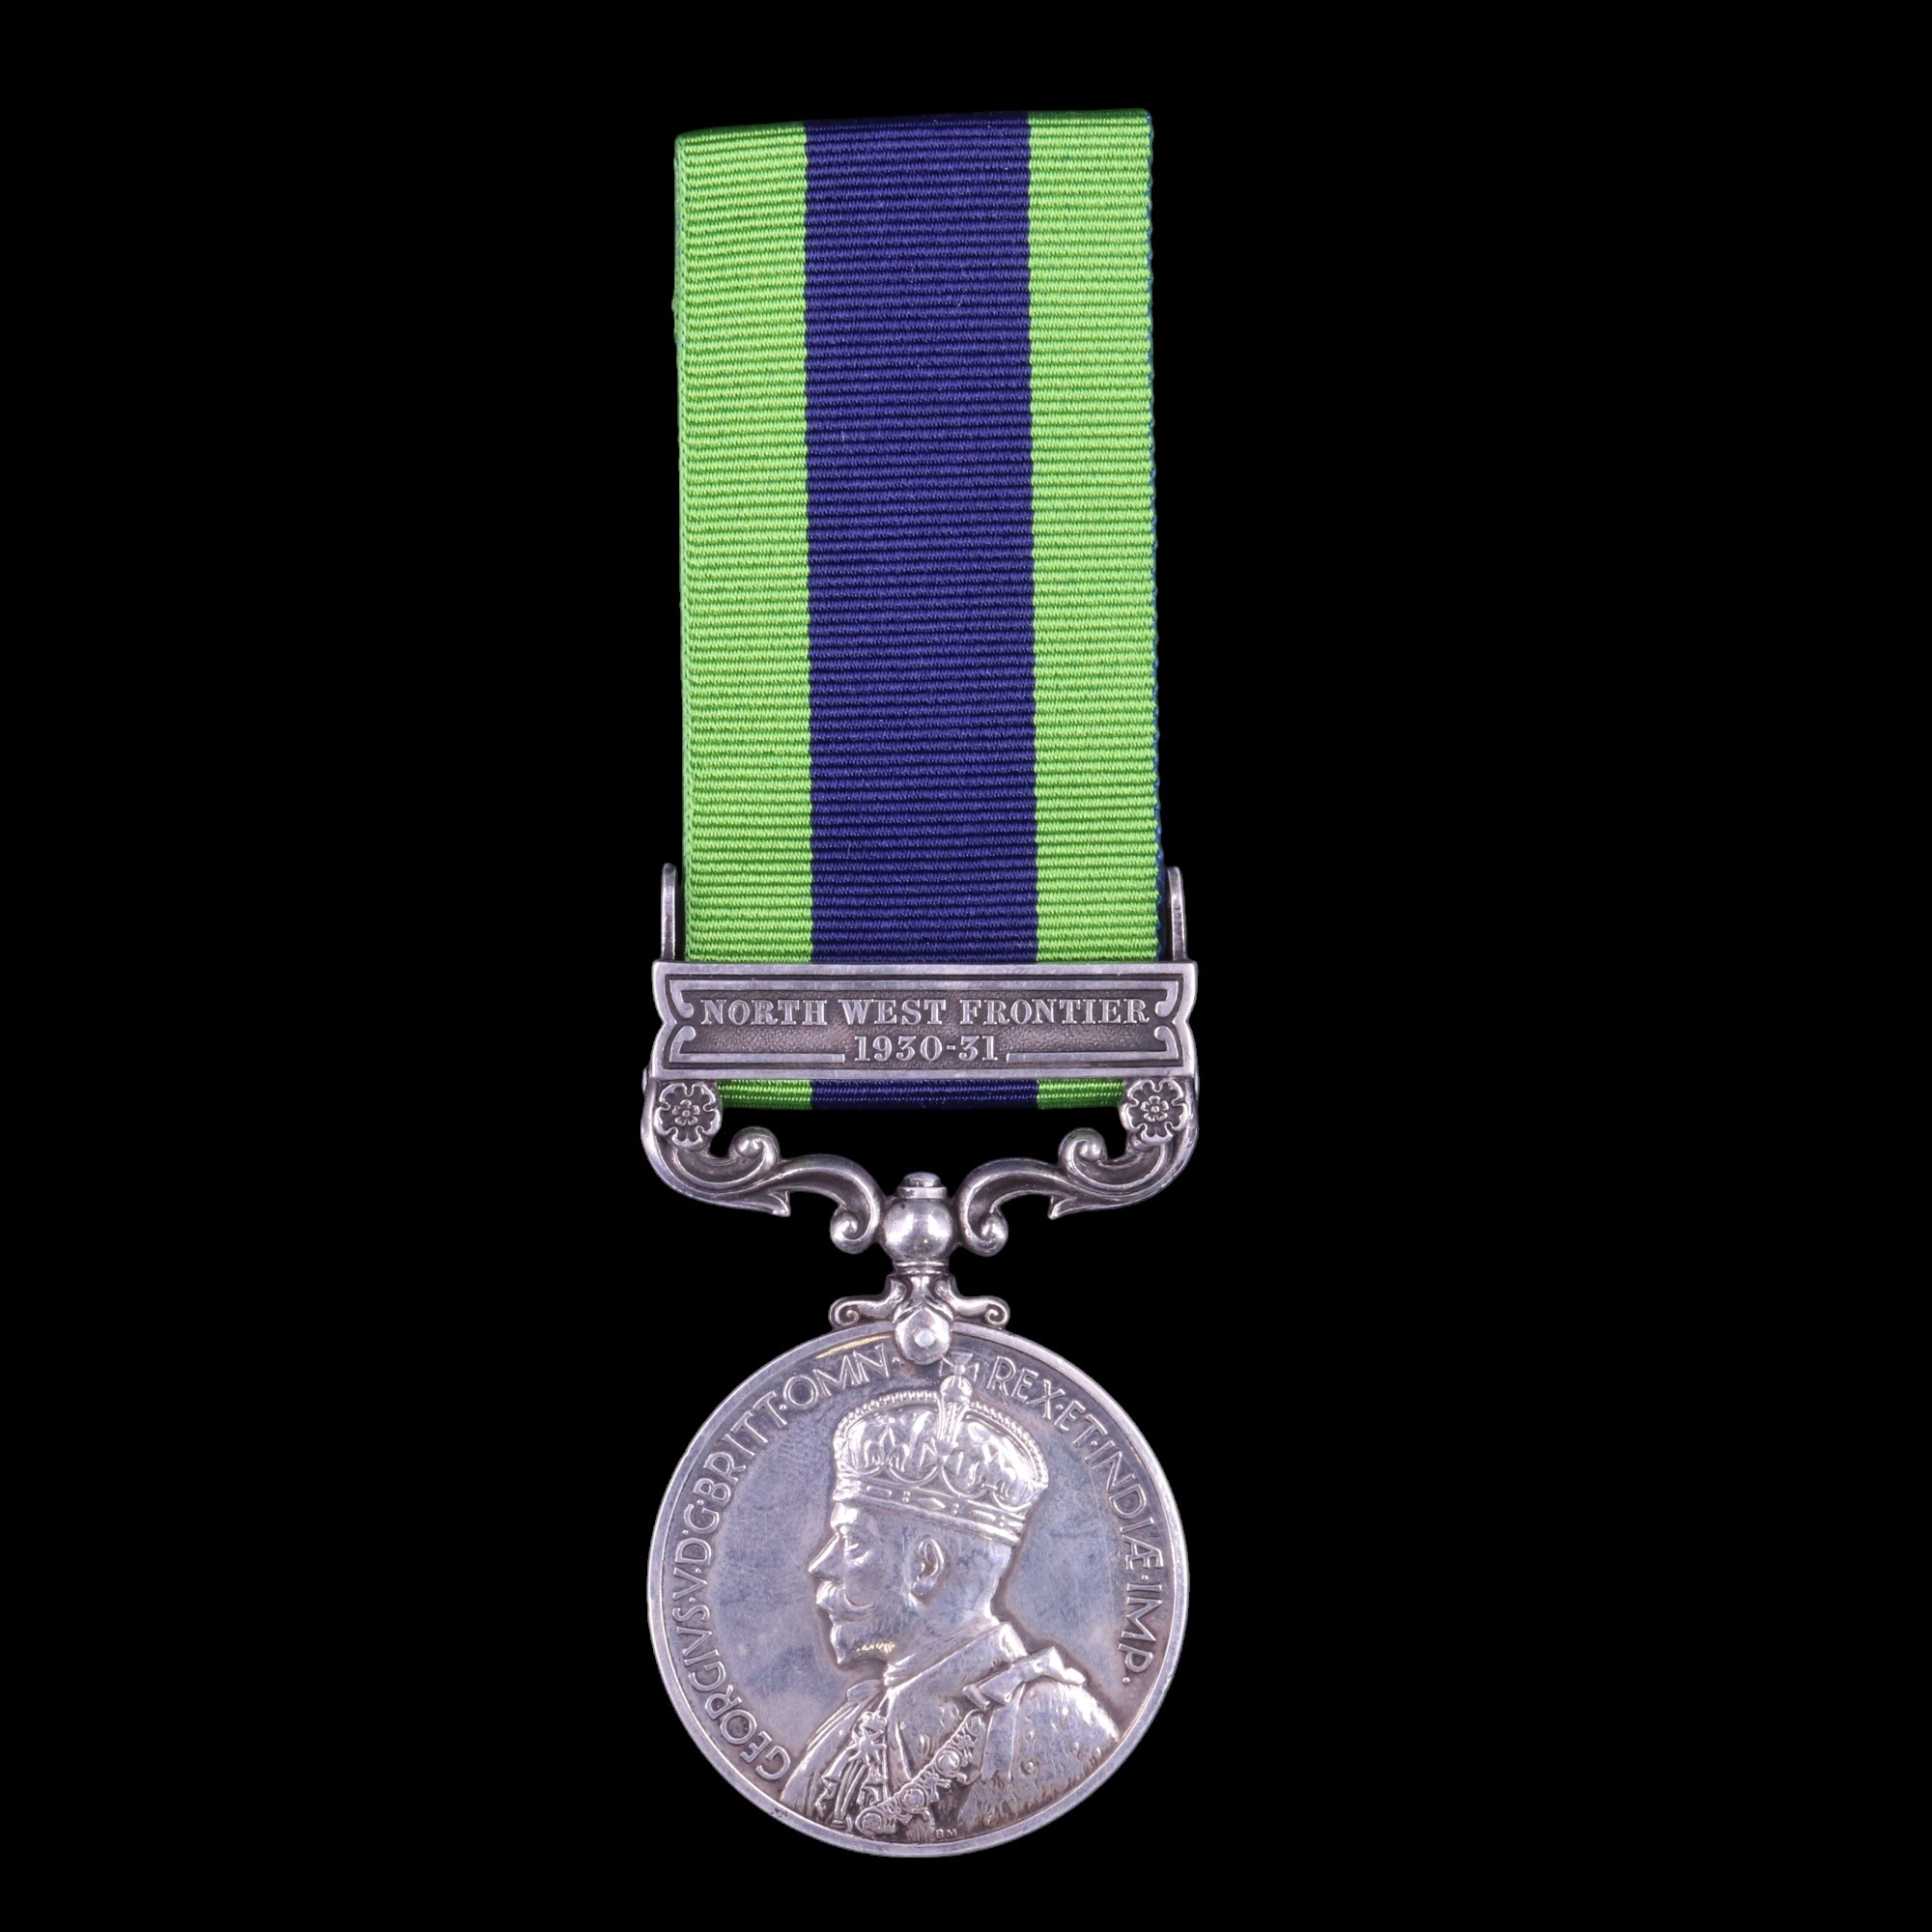 An India General Service Medal with North West Frontier 1930-31 clasp to 3594562 Pte V Dobson,